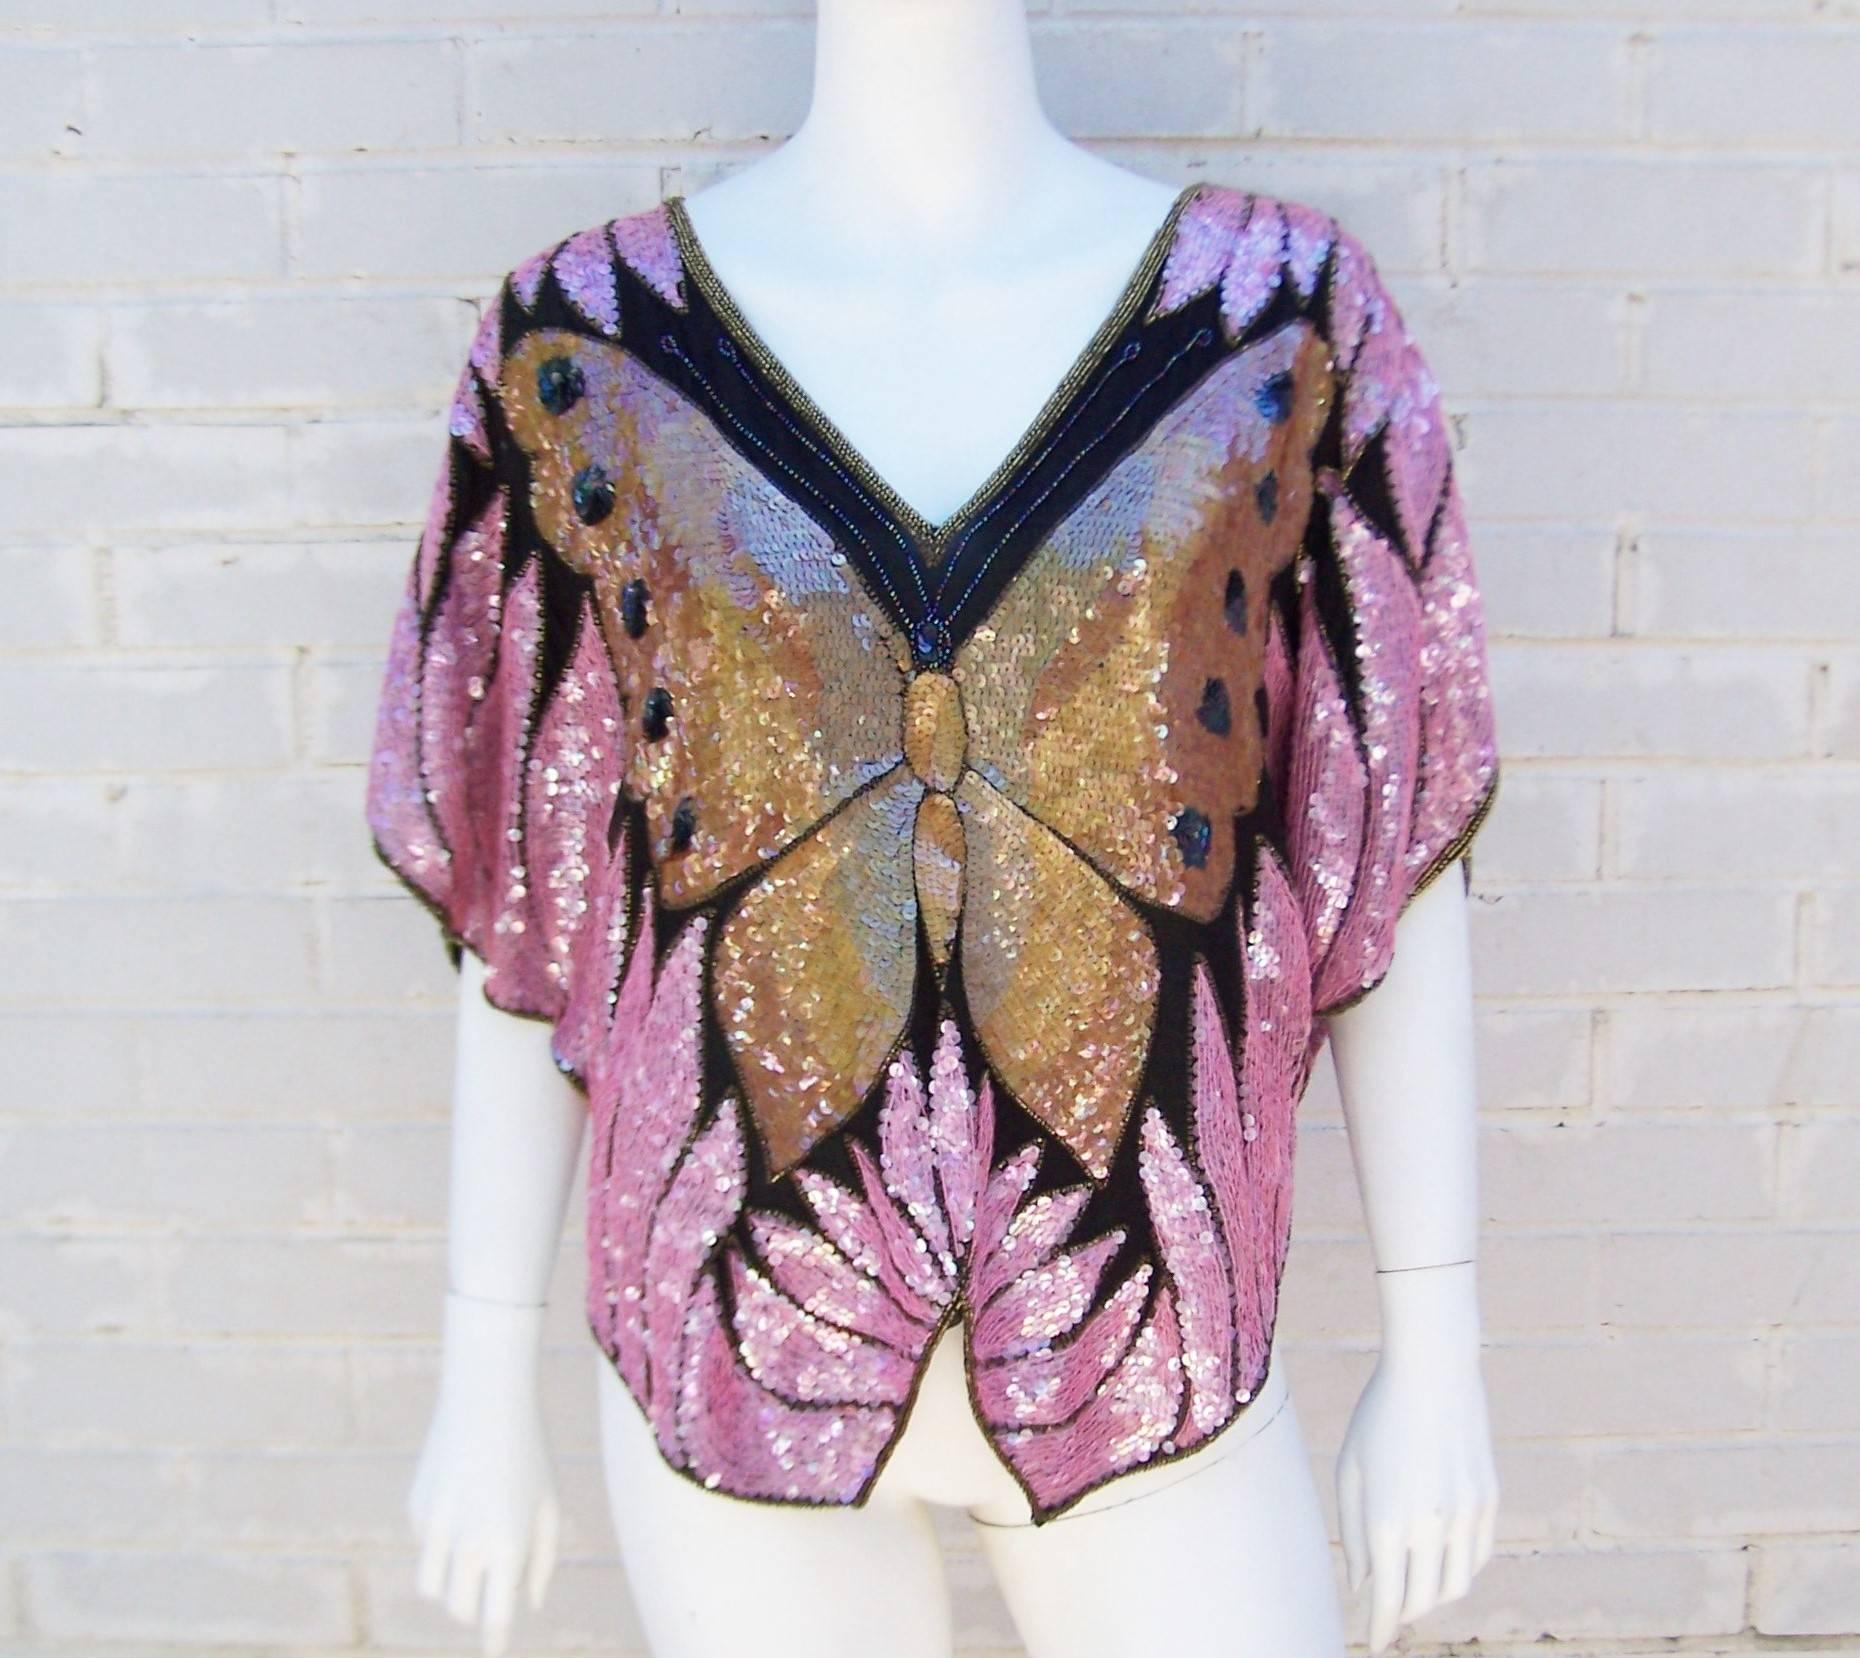 Transform yourself with a sequin touch!  This C.1980 pullover top by Saks Fifth Avenue is an amazing piece of wearable art.  The lined gauzy black fabric background serves as a canvas for the well placed pink, midnight blue and golden sequins.  Gold